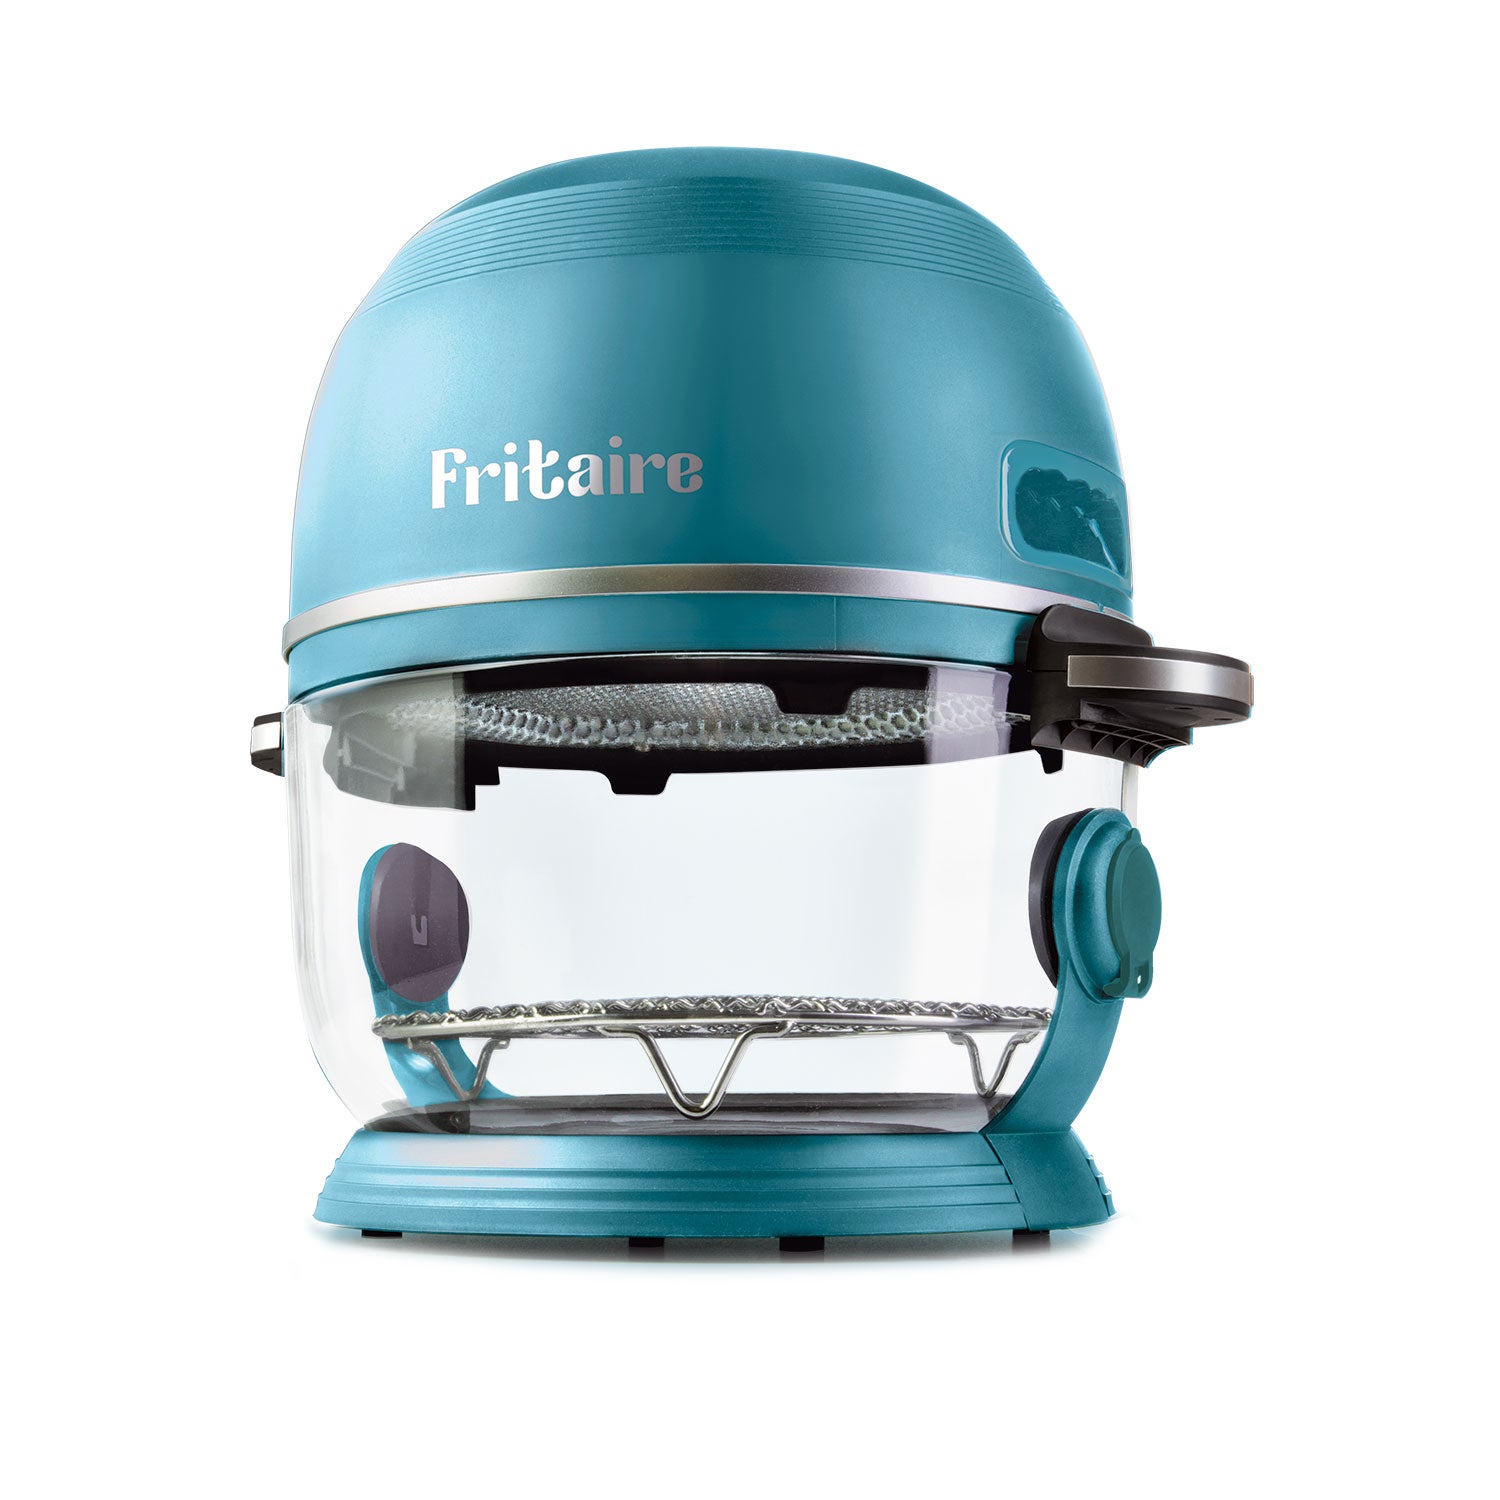 Self Cleaning Air Fryer 🧼 from @fritaire #airfryer #kitchen  #kitchengadgets #food